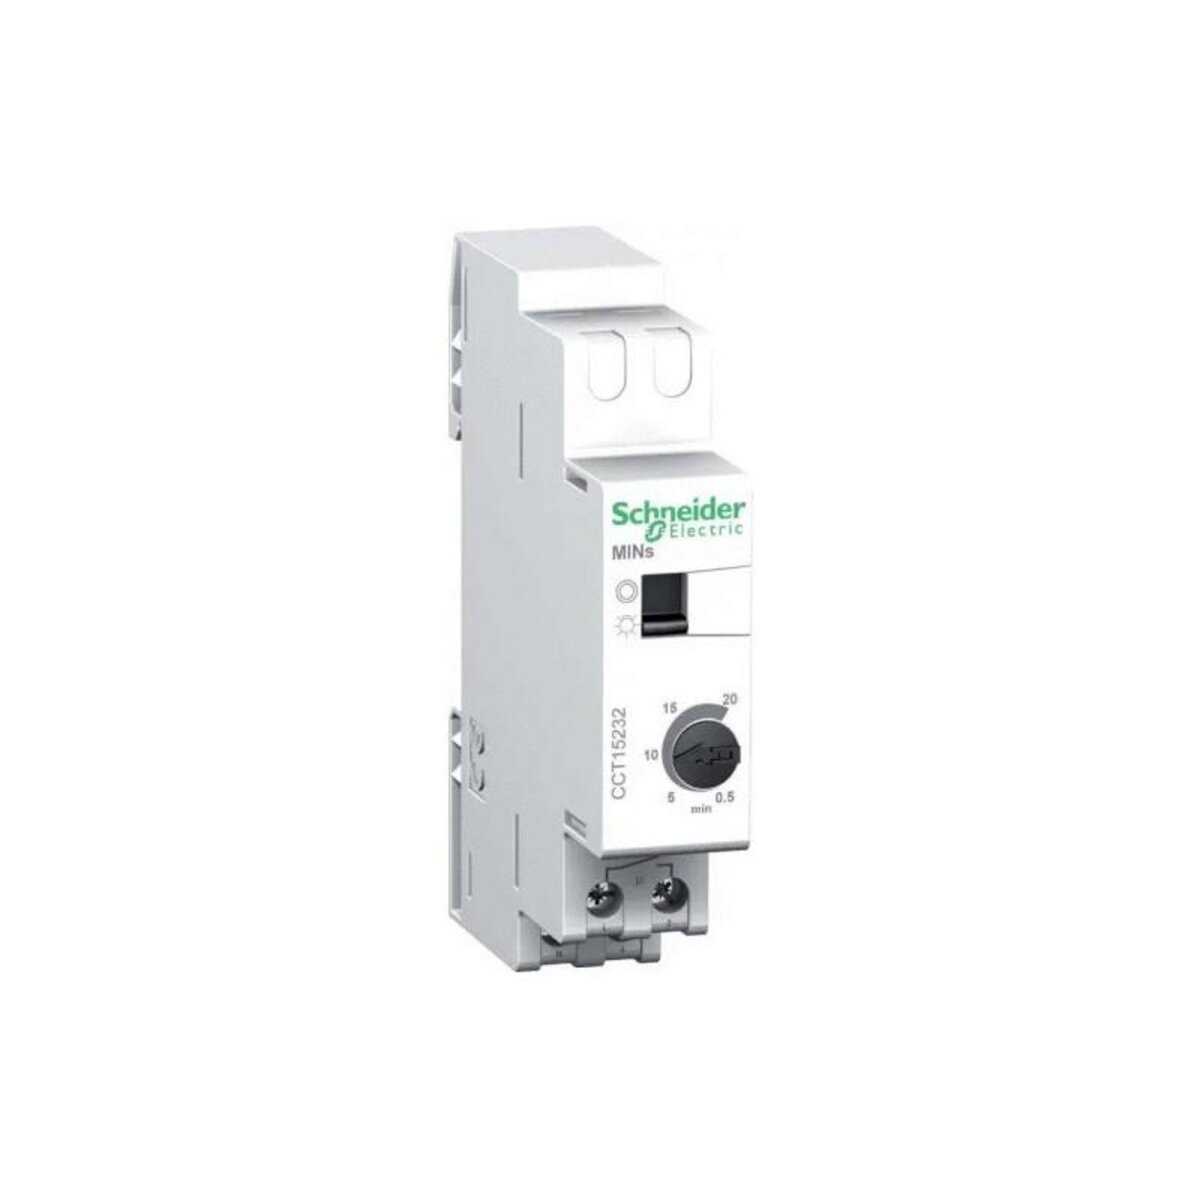 Schneider Electric Minuterie 30s..20mn Acti9 MINs contact 16A 230Vca marche forcée SCHNEIDER ELECTRIC CCT15232